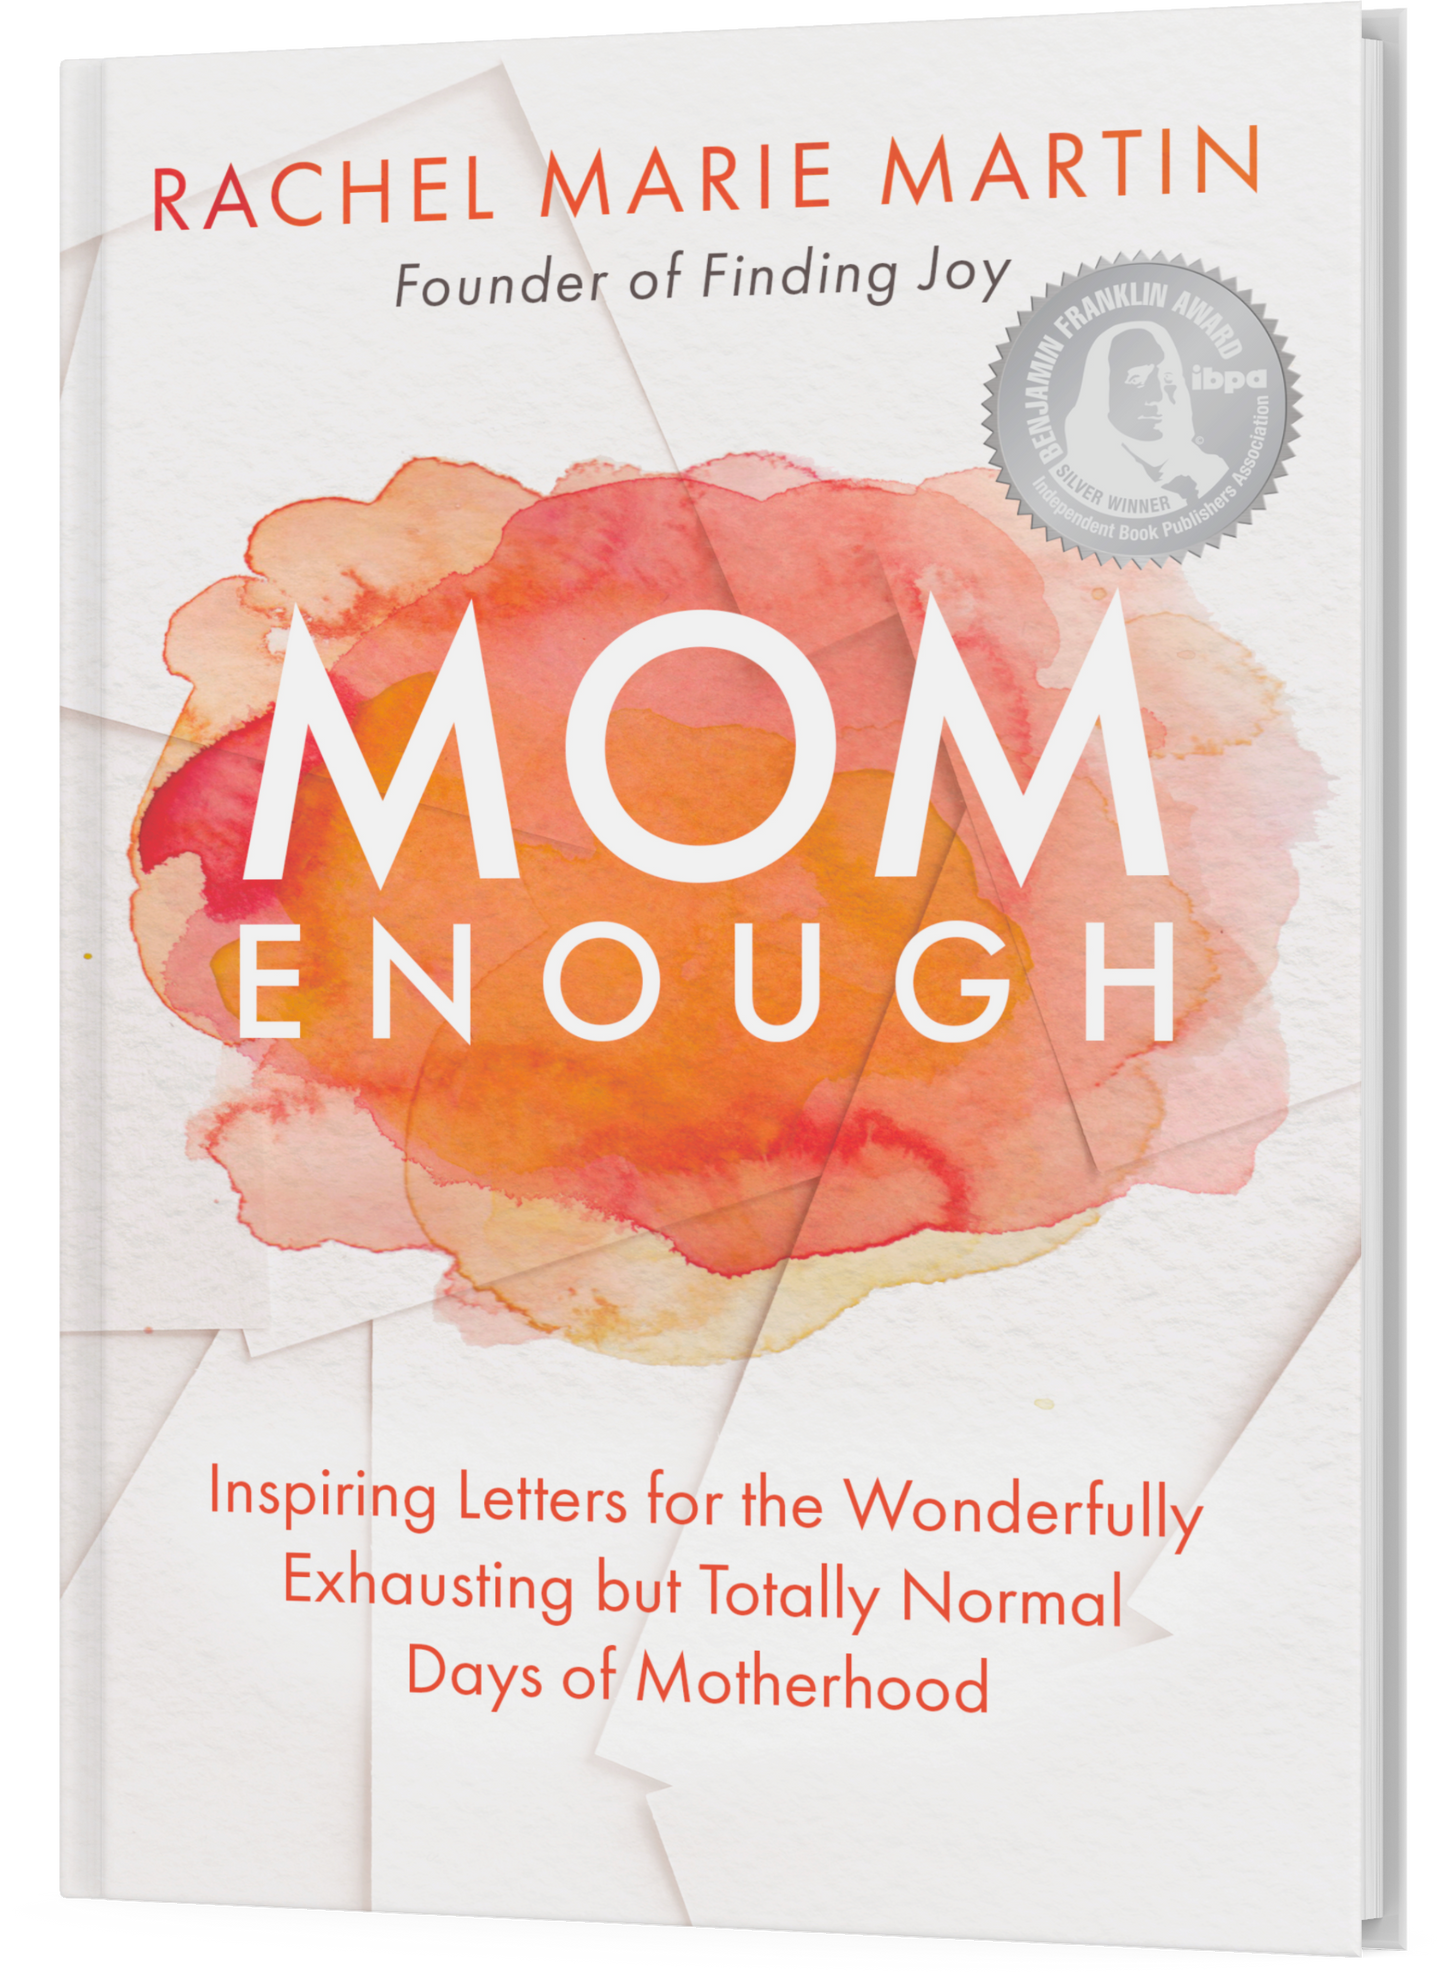 Mom Enough: Inspiring Letters for the Wonderfully Exhausting but Totally Normal Days of Motherhood